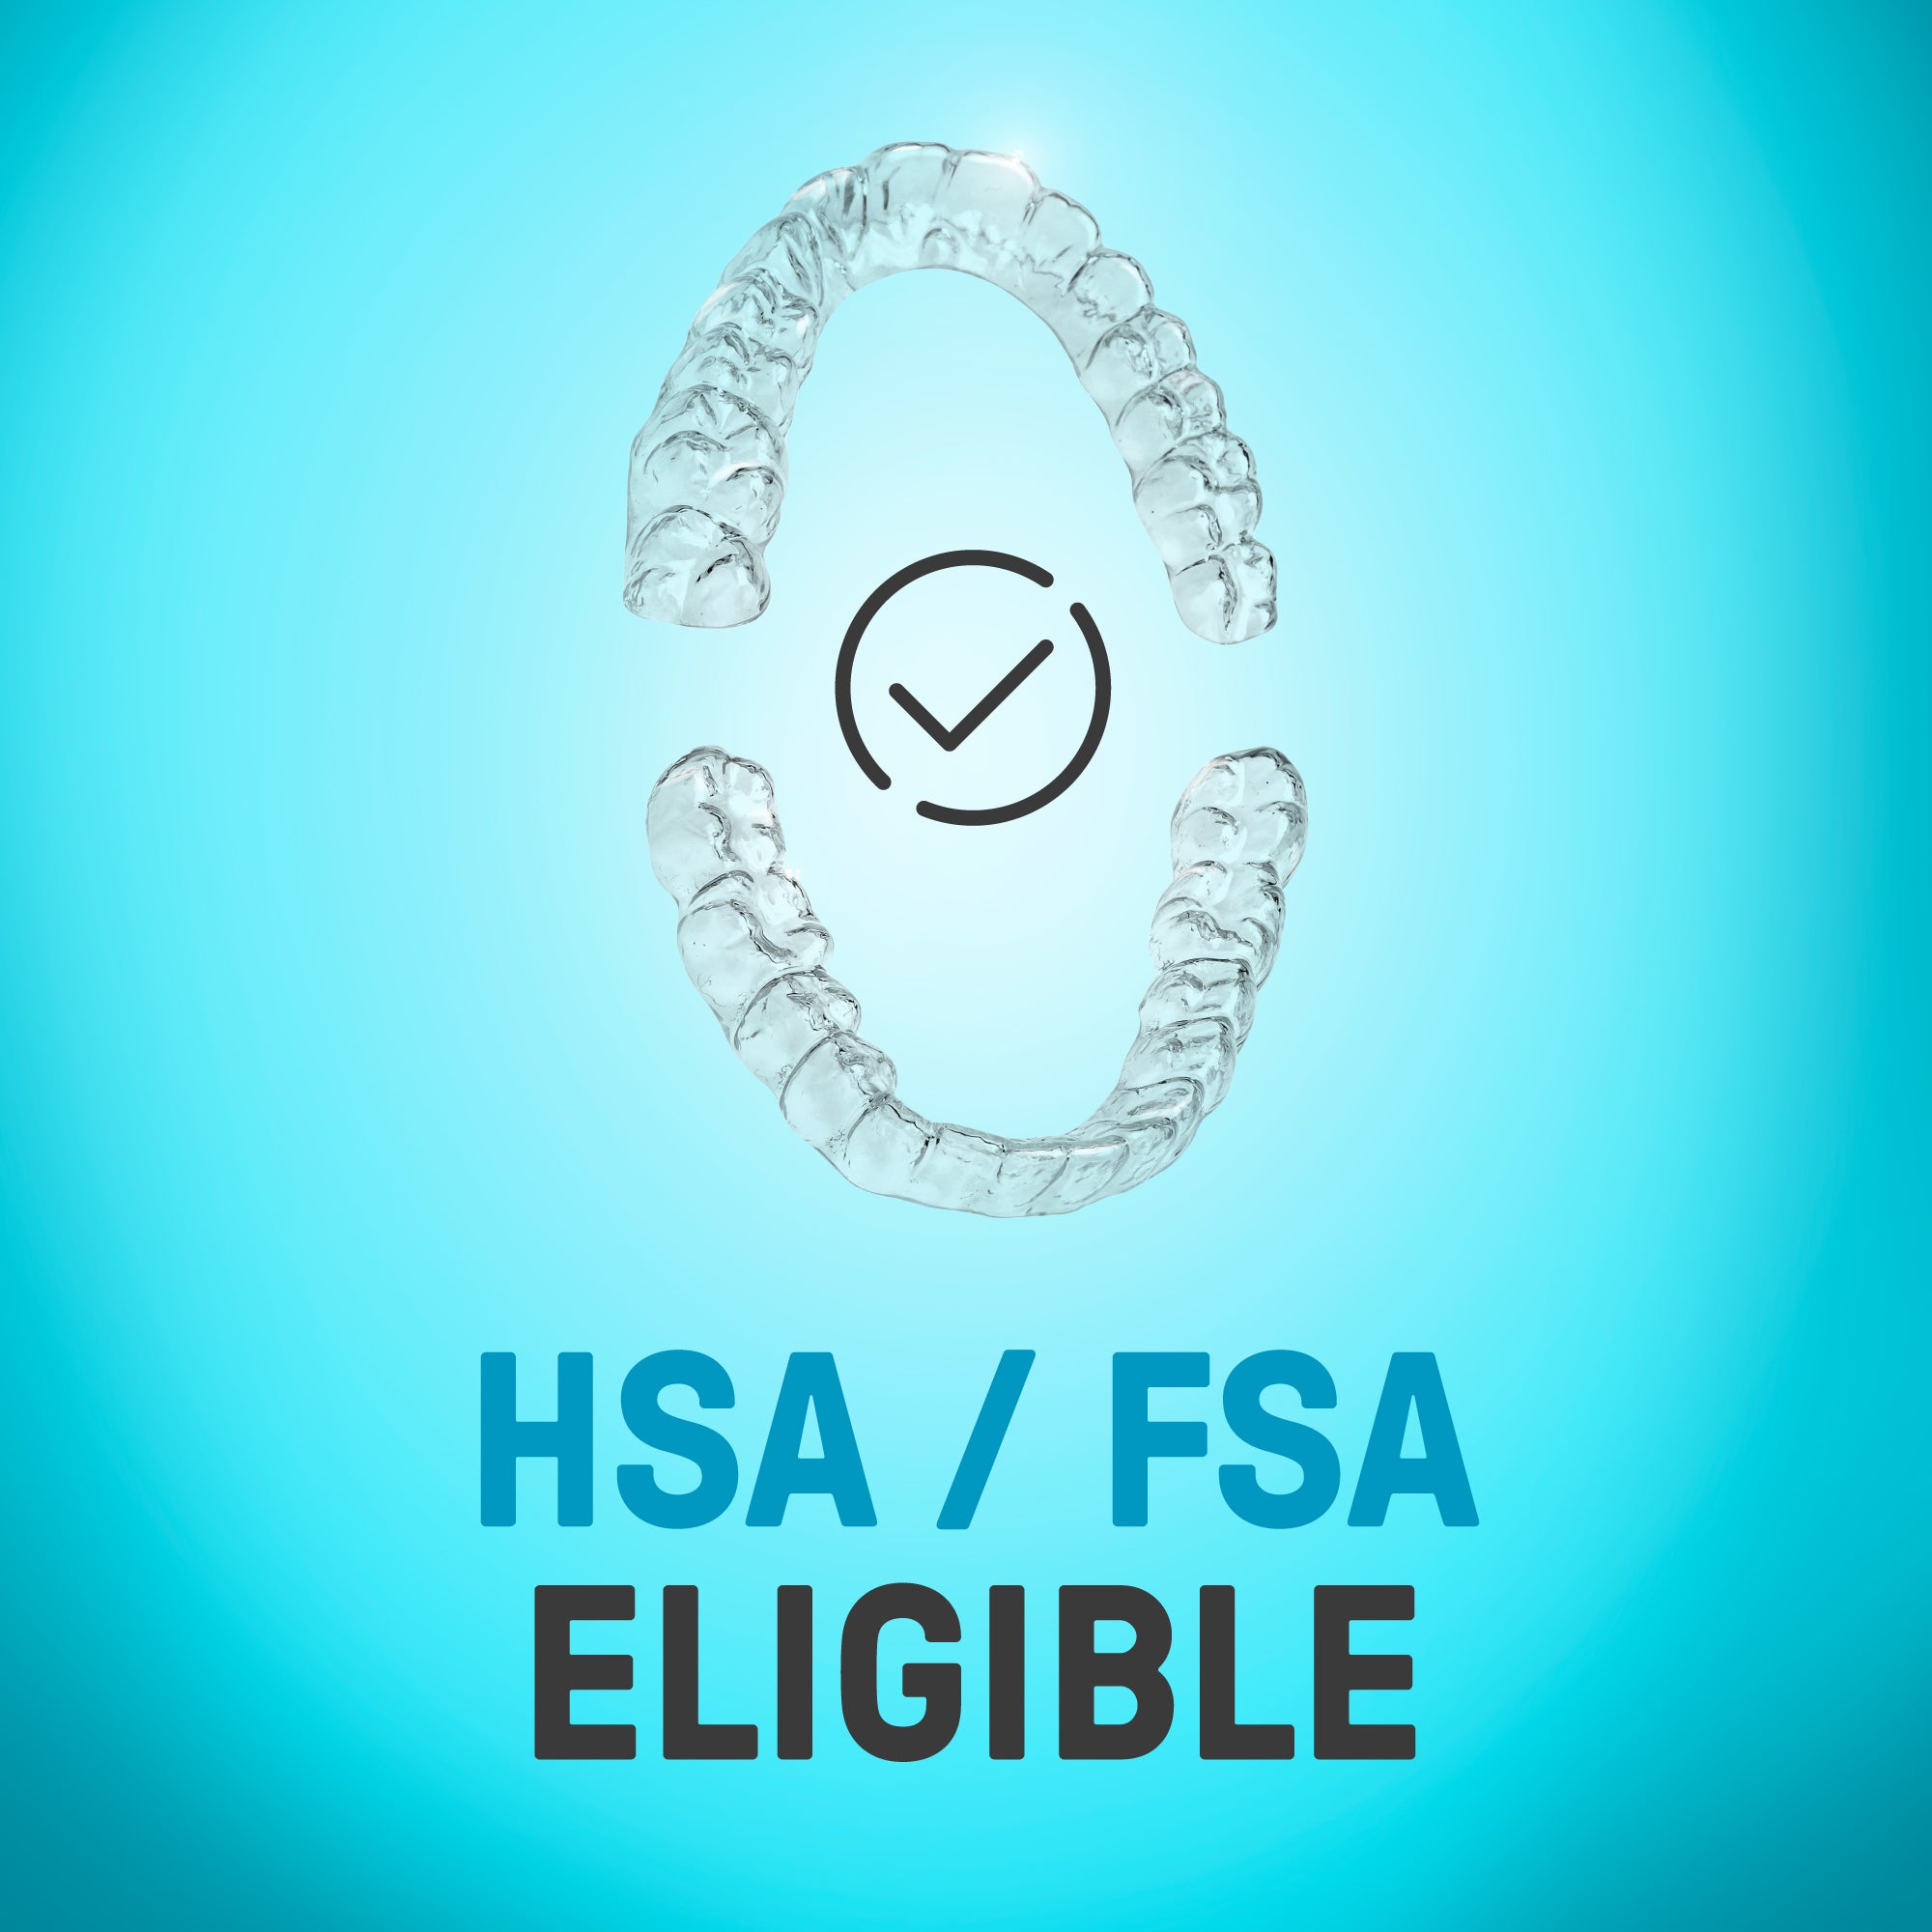 Clear orthodontic aligners with a checkmark, indicating they are eligible for health savings account (hsa) or flexible spending account (fsa) expenses.